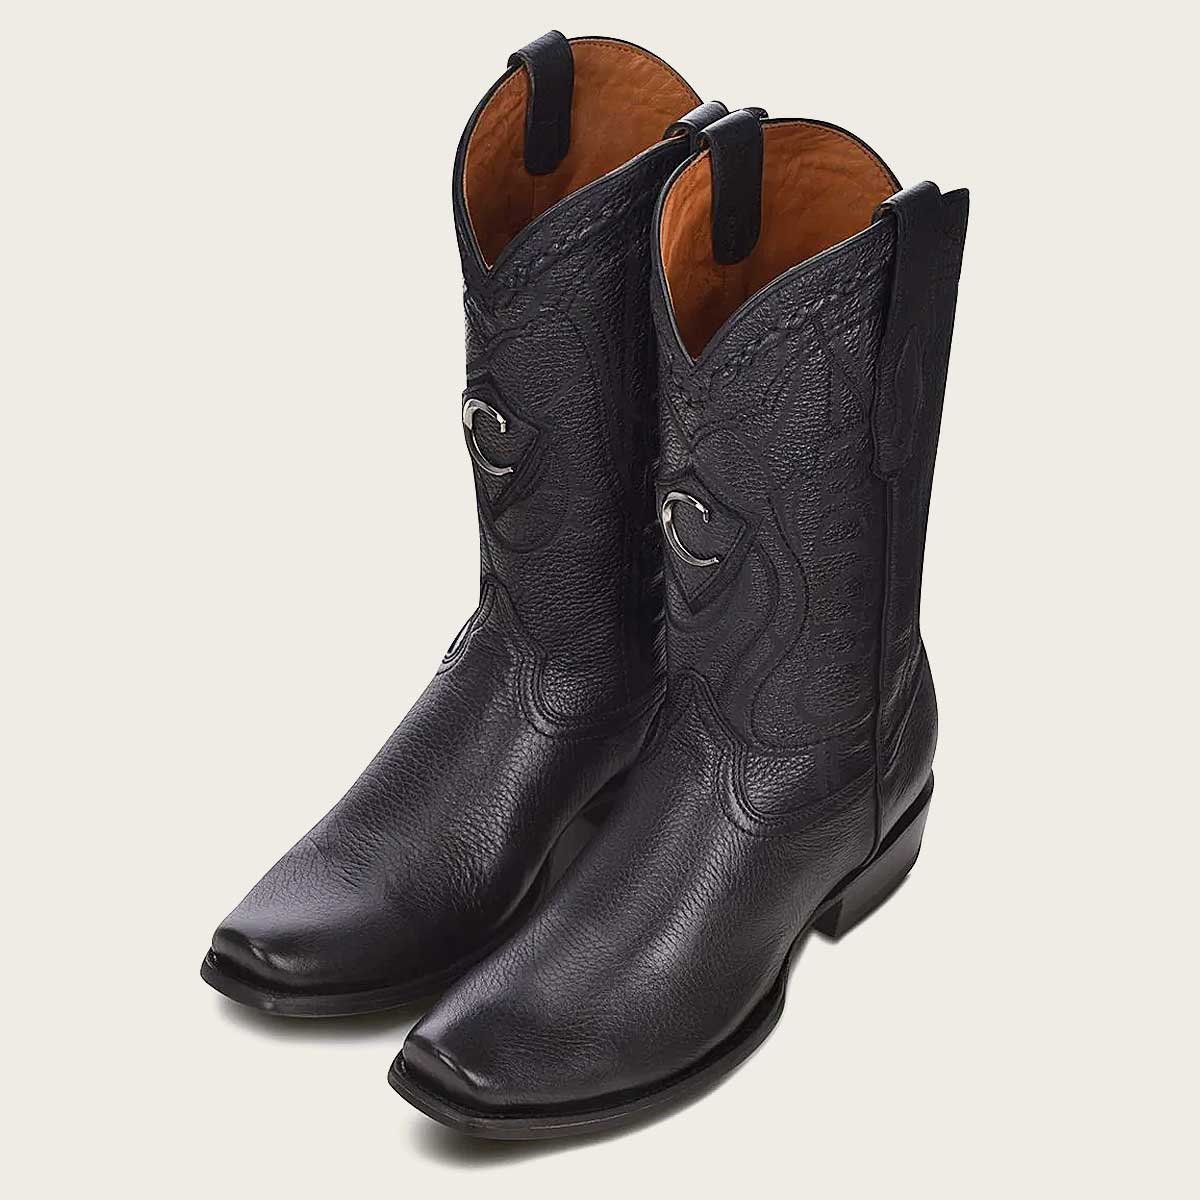 Stylish black leather boot with intricate engraving and a metallic monogram accent.